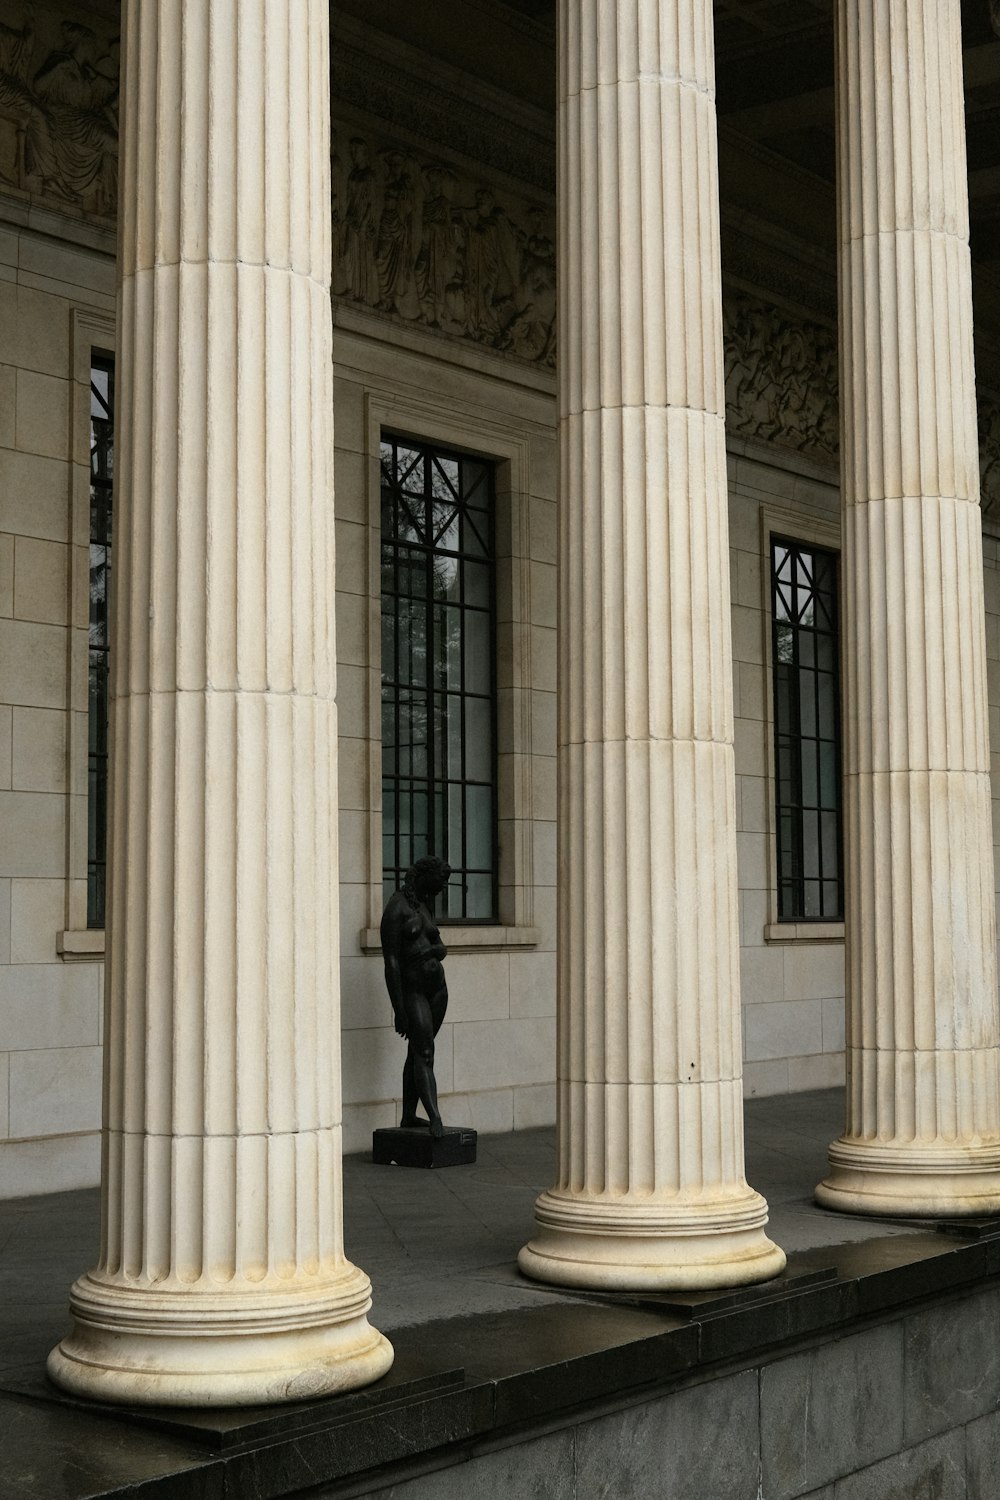 a person standing in front of a row of pillars